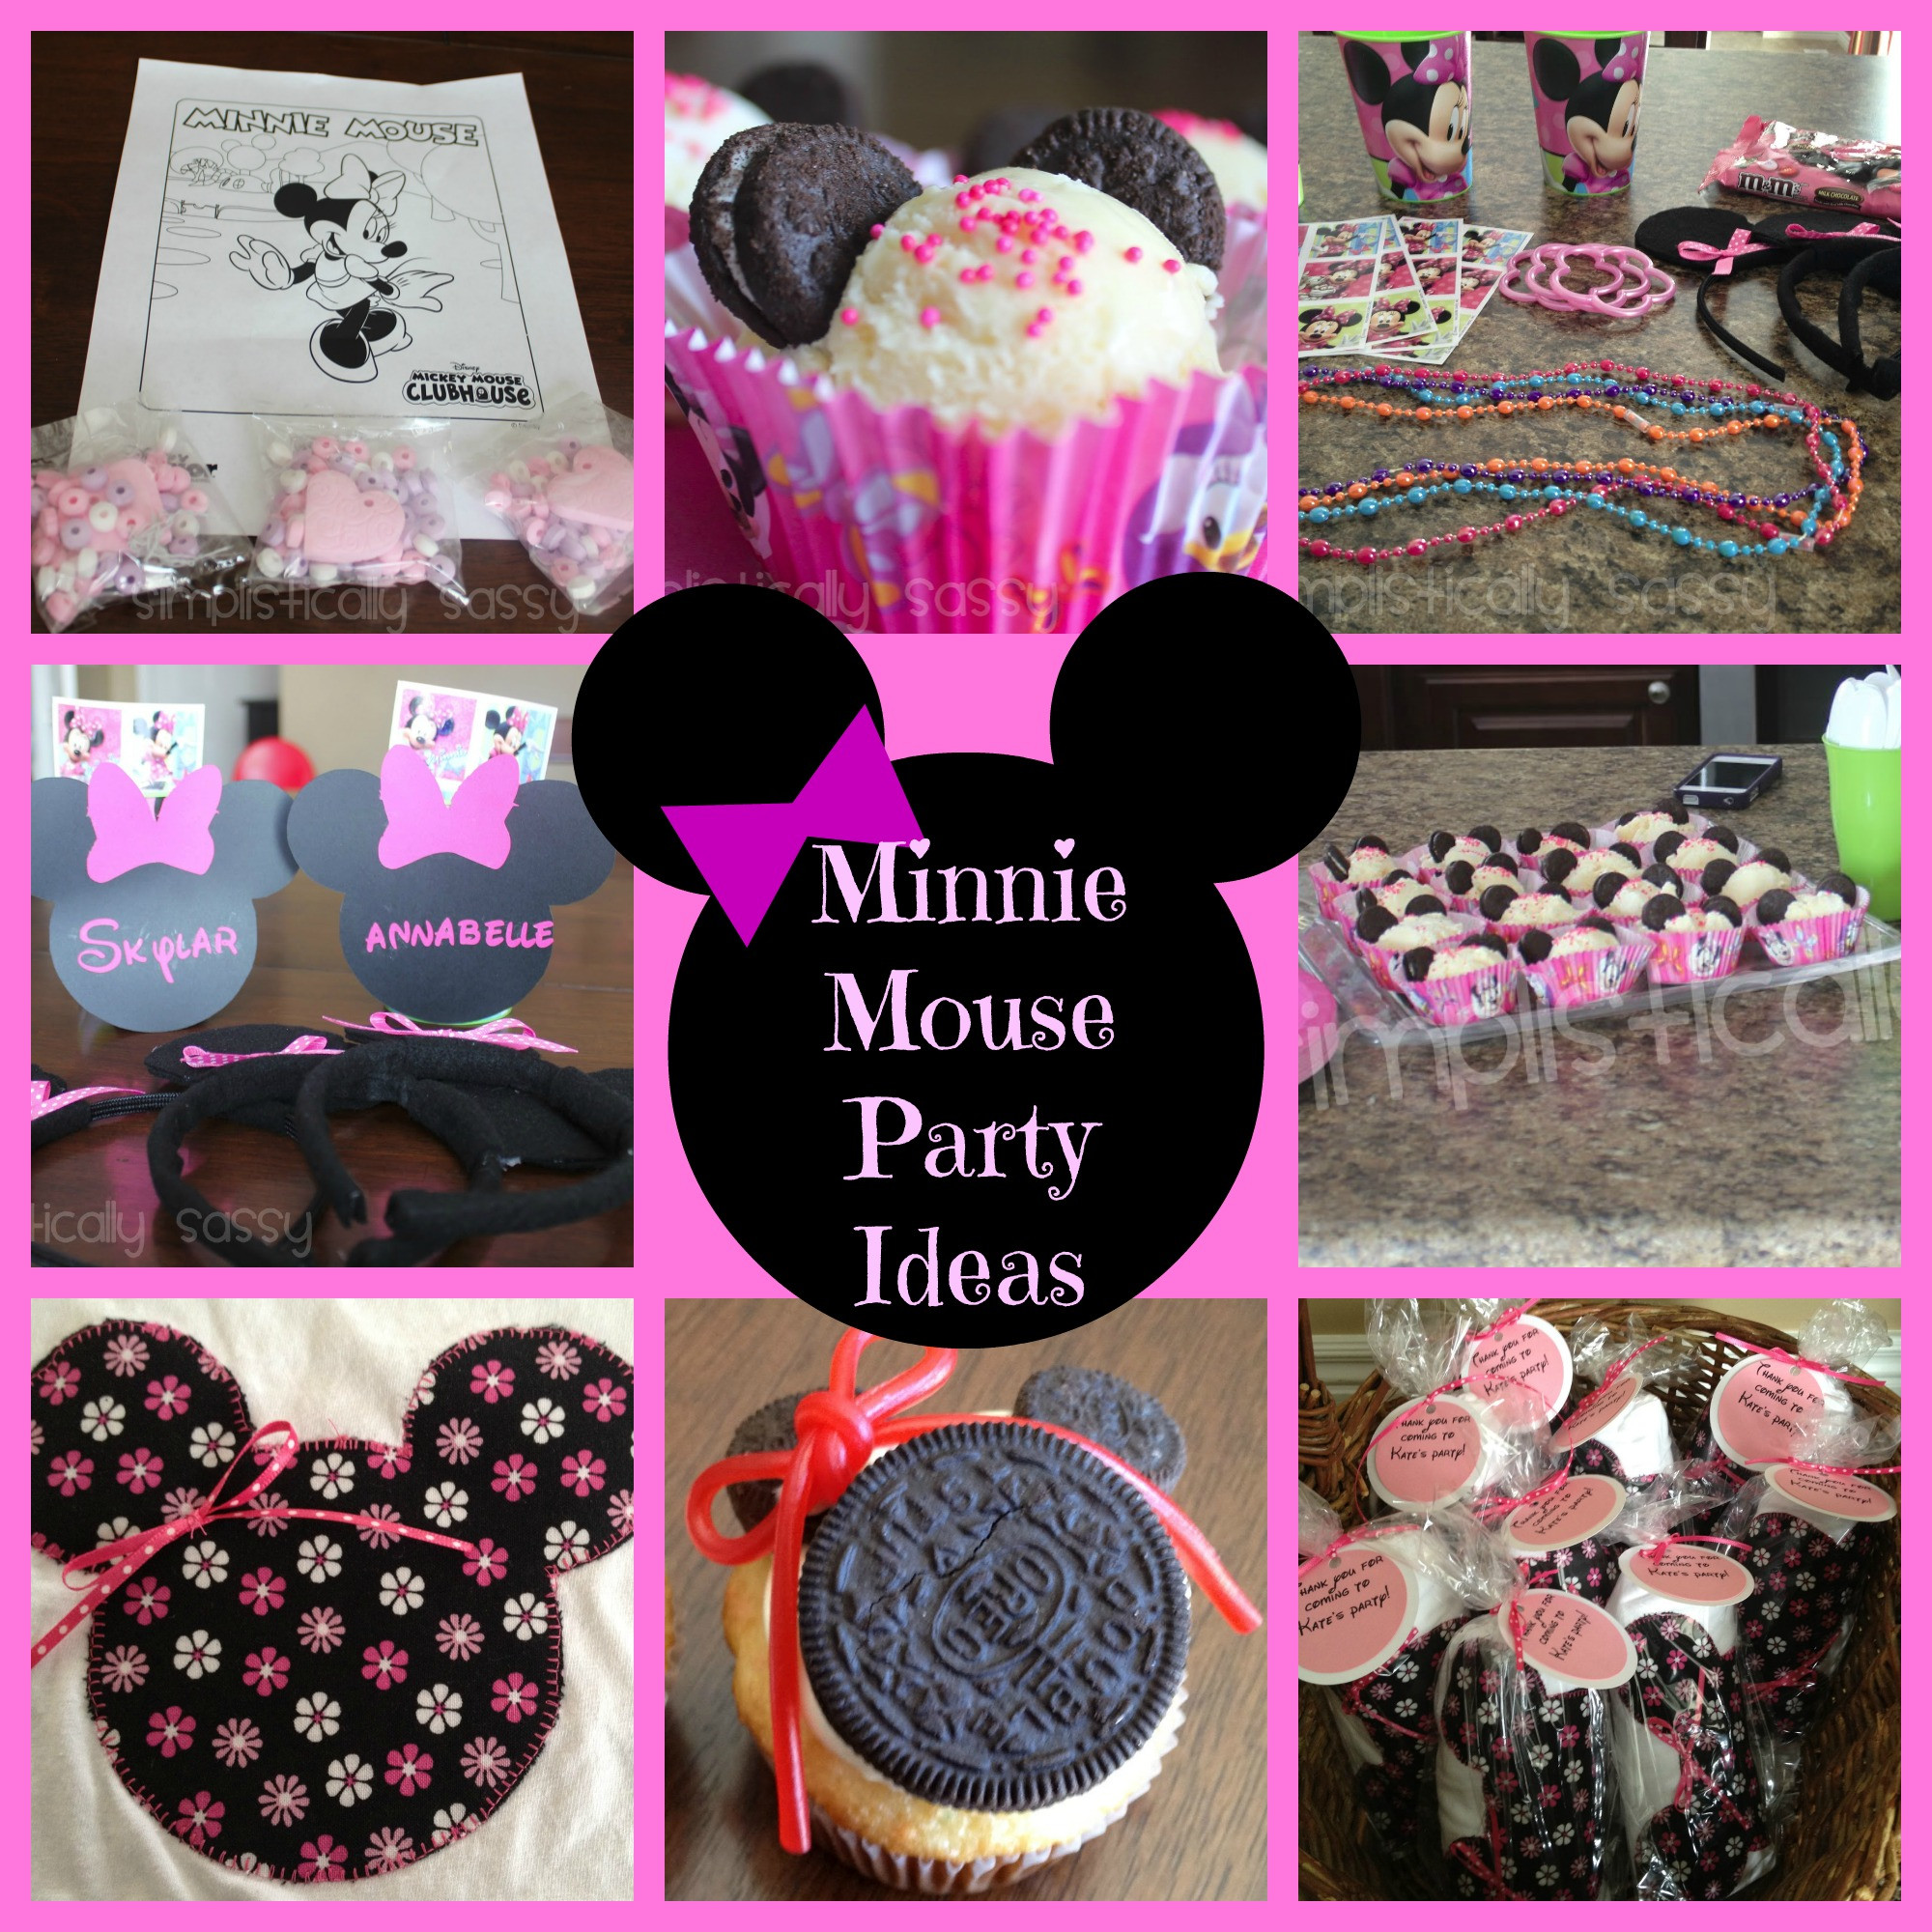 DIY Minnie Mouse Party Decorations
 Minnie Mouse Party Ideas events to CELEBRATE